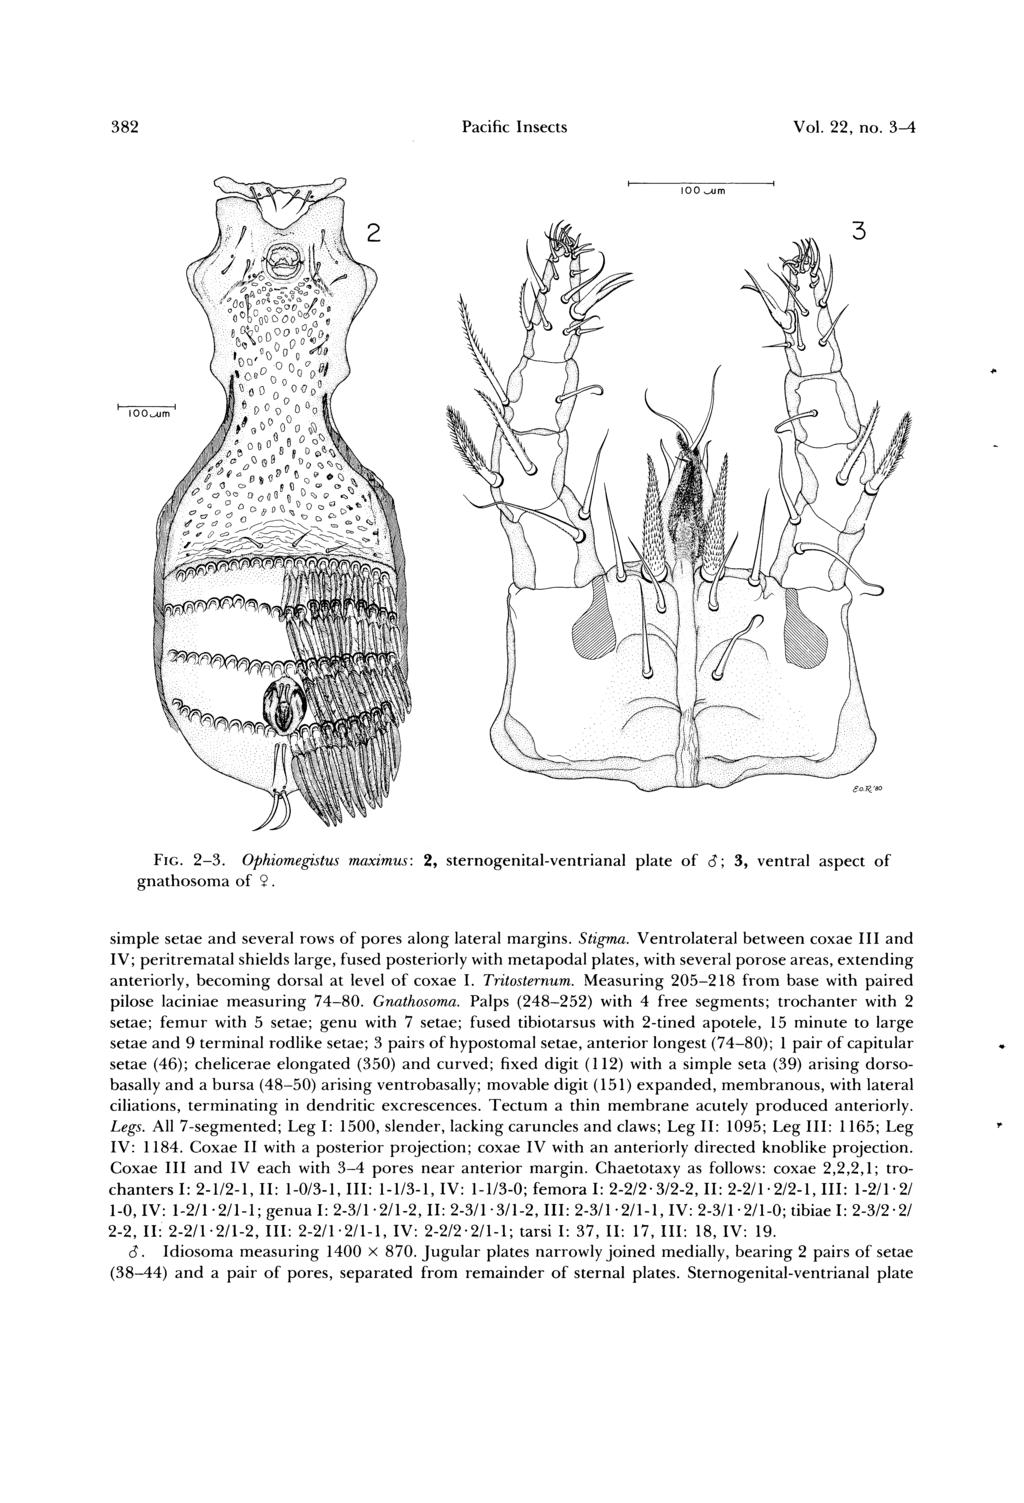 382 Pacific Insects Vol. 22, no. 3-4 FIG. 2-3. Ophiomegistus maximus: 2, sternogenital-ventrianal plate of S; 3, ventral aspect of gnathosoma of 9.